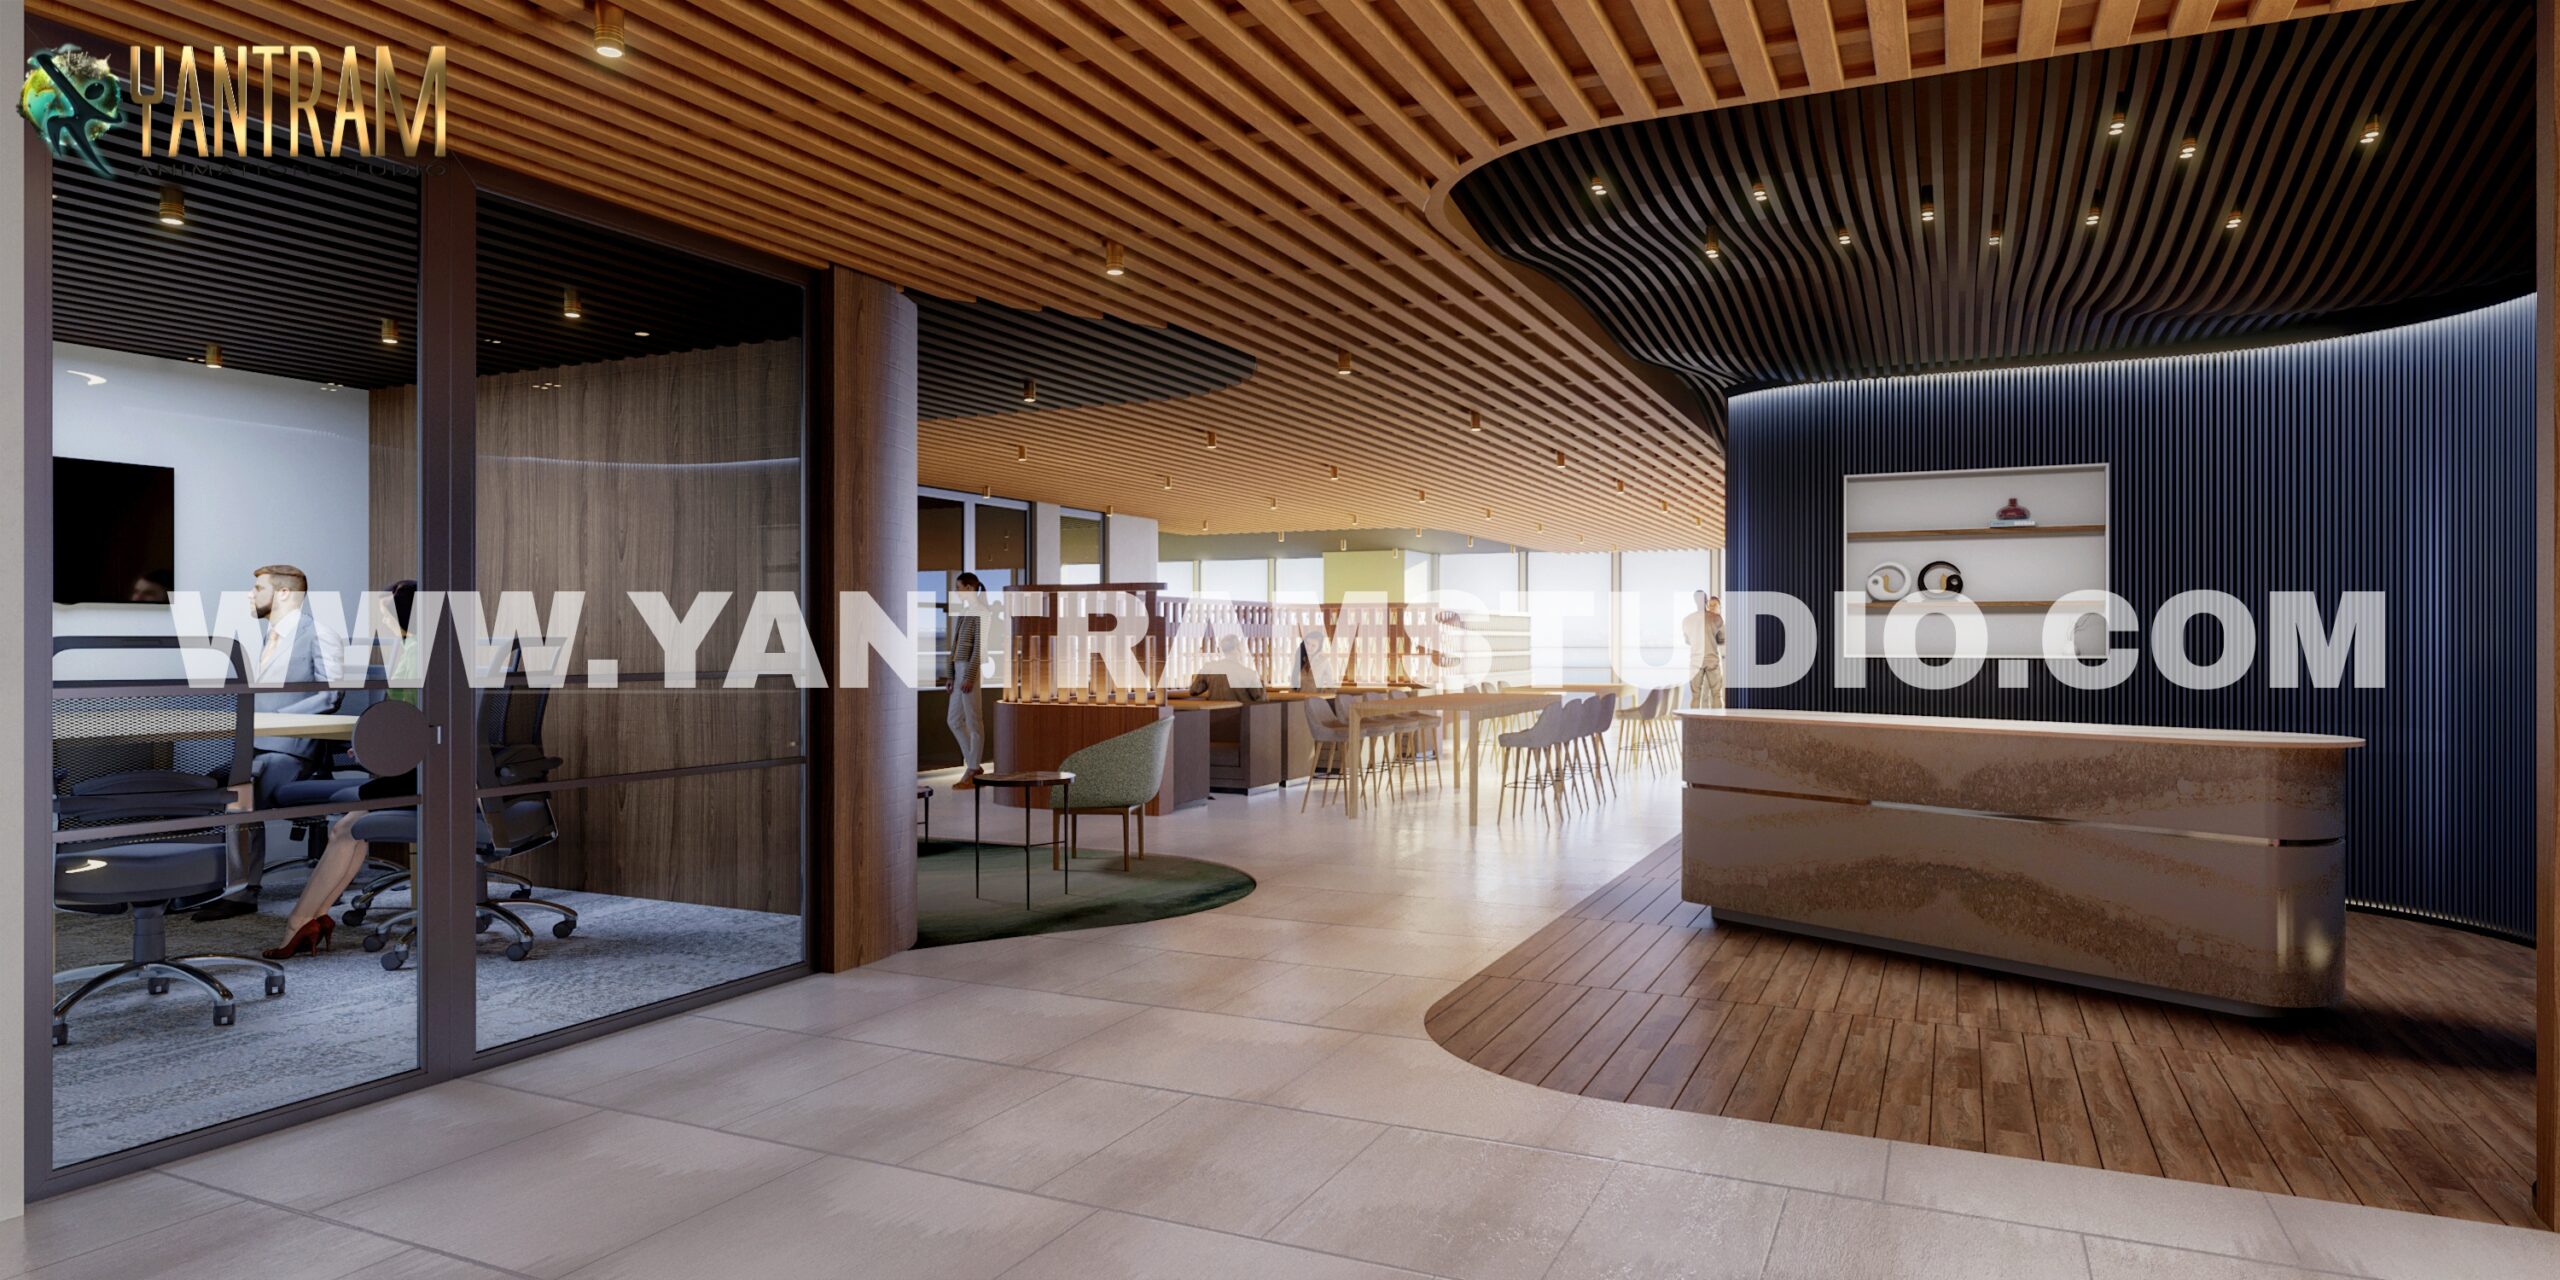 Modern Office Reception Area Interior Design by Yantram 3d interior rendering company, Pearland, Texas